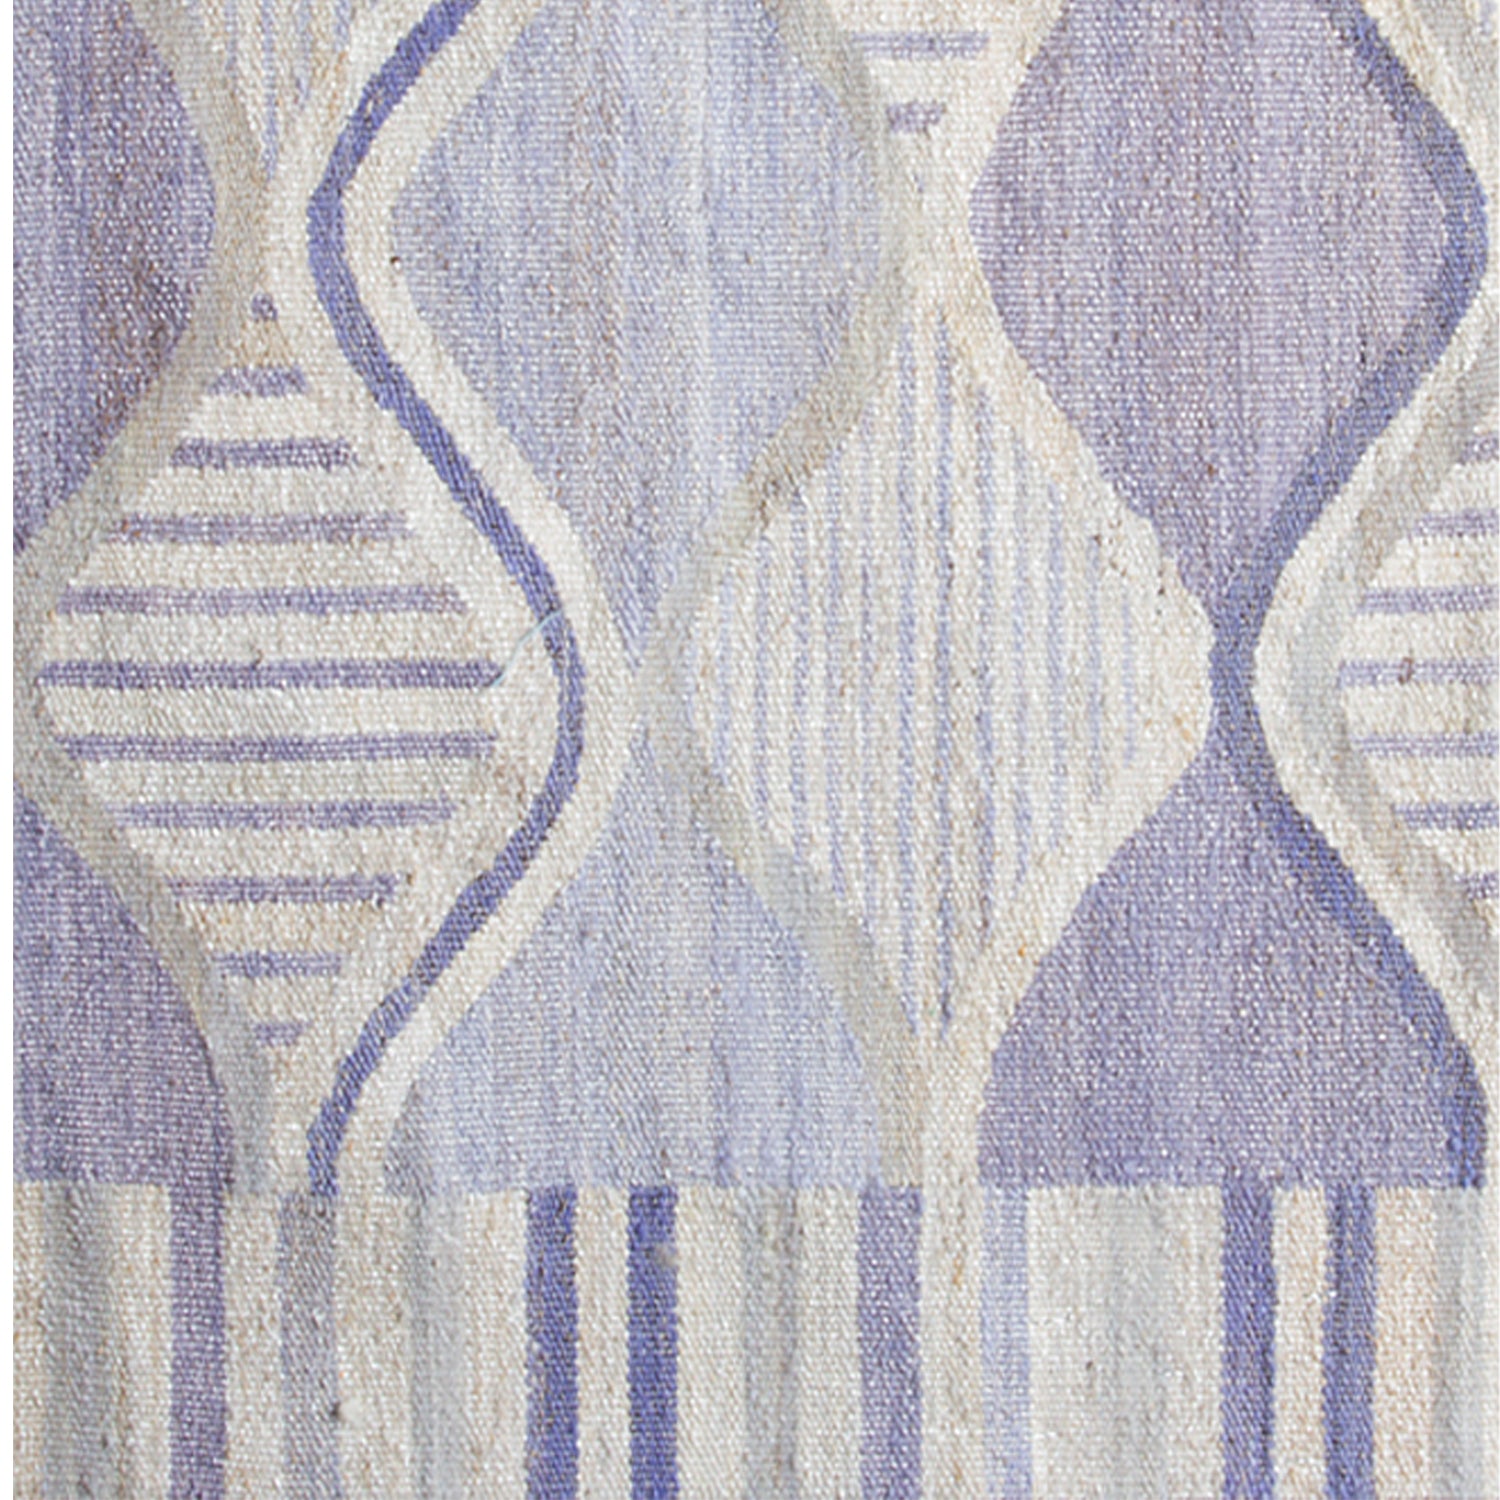 Woven rug swatch with an abstract curvolinear pattern and striped borders in shades of purple and cream.